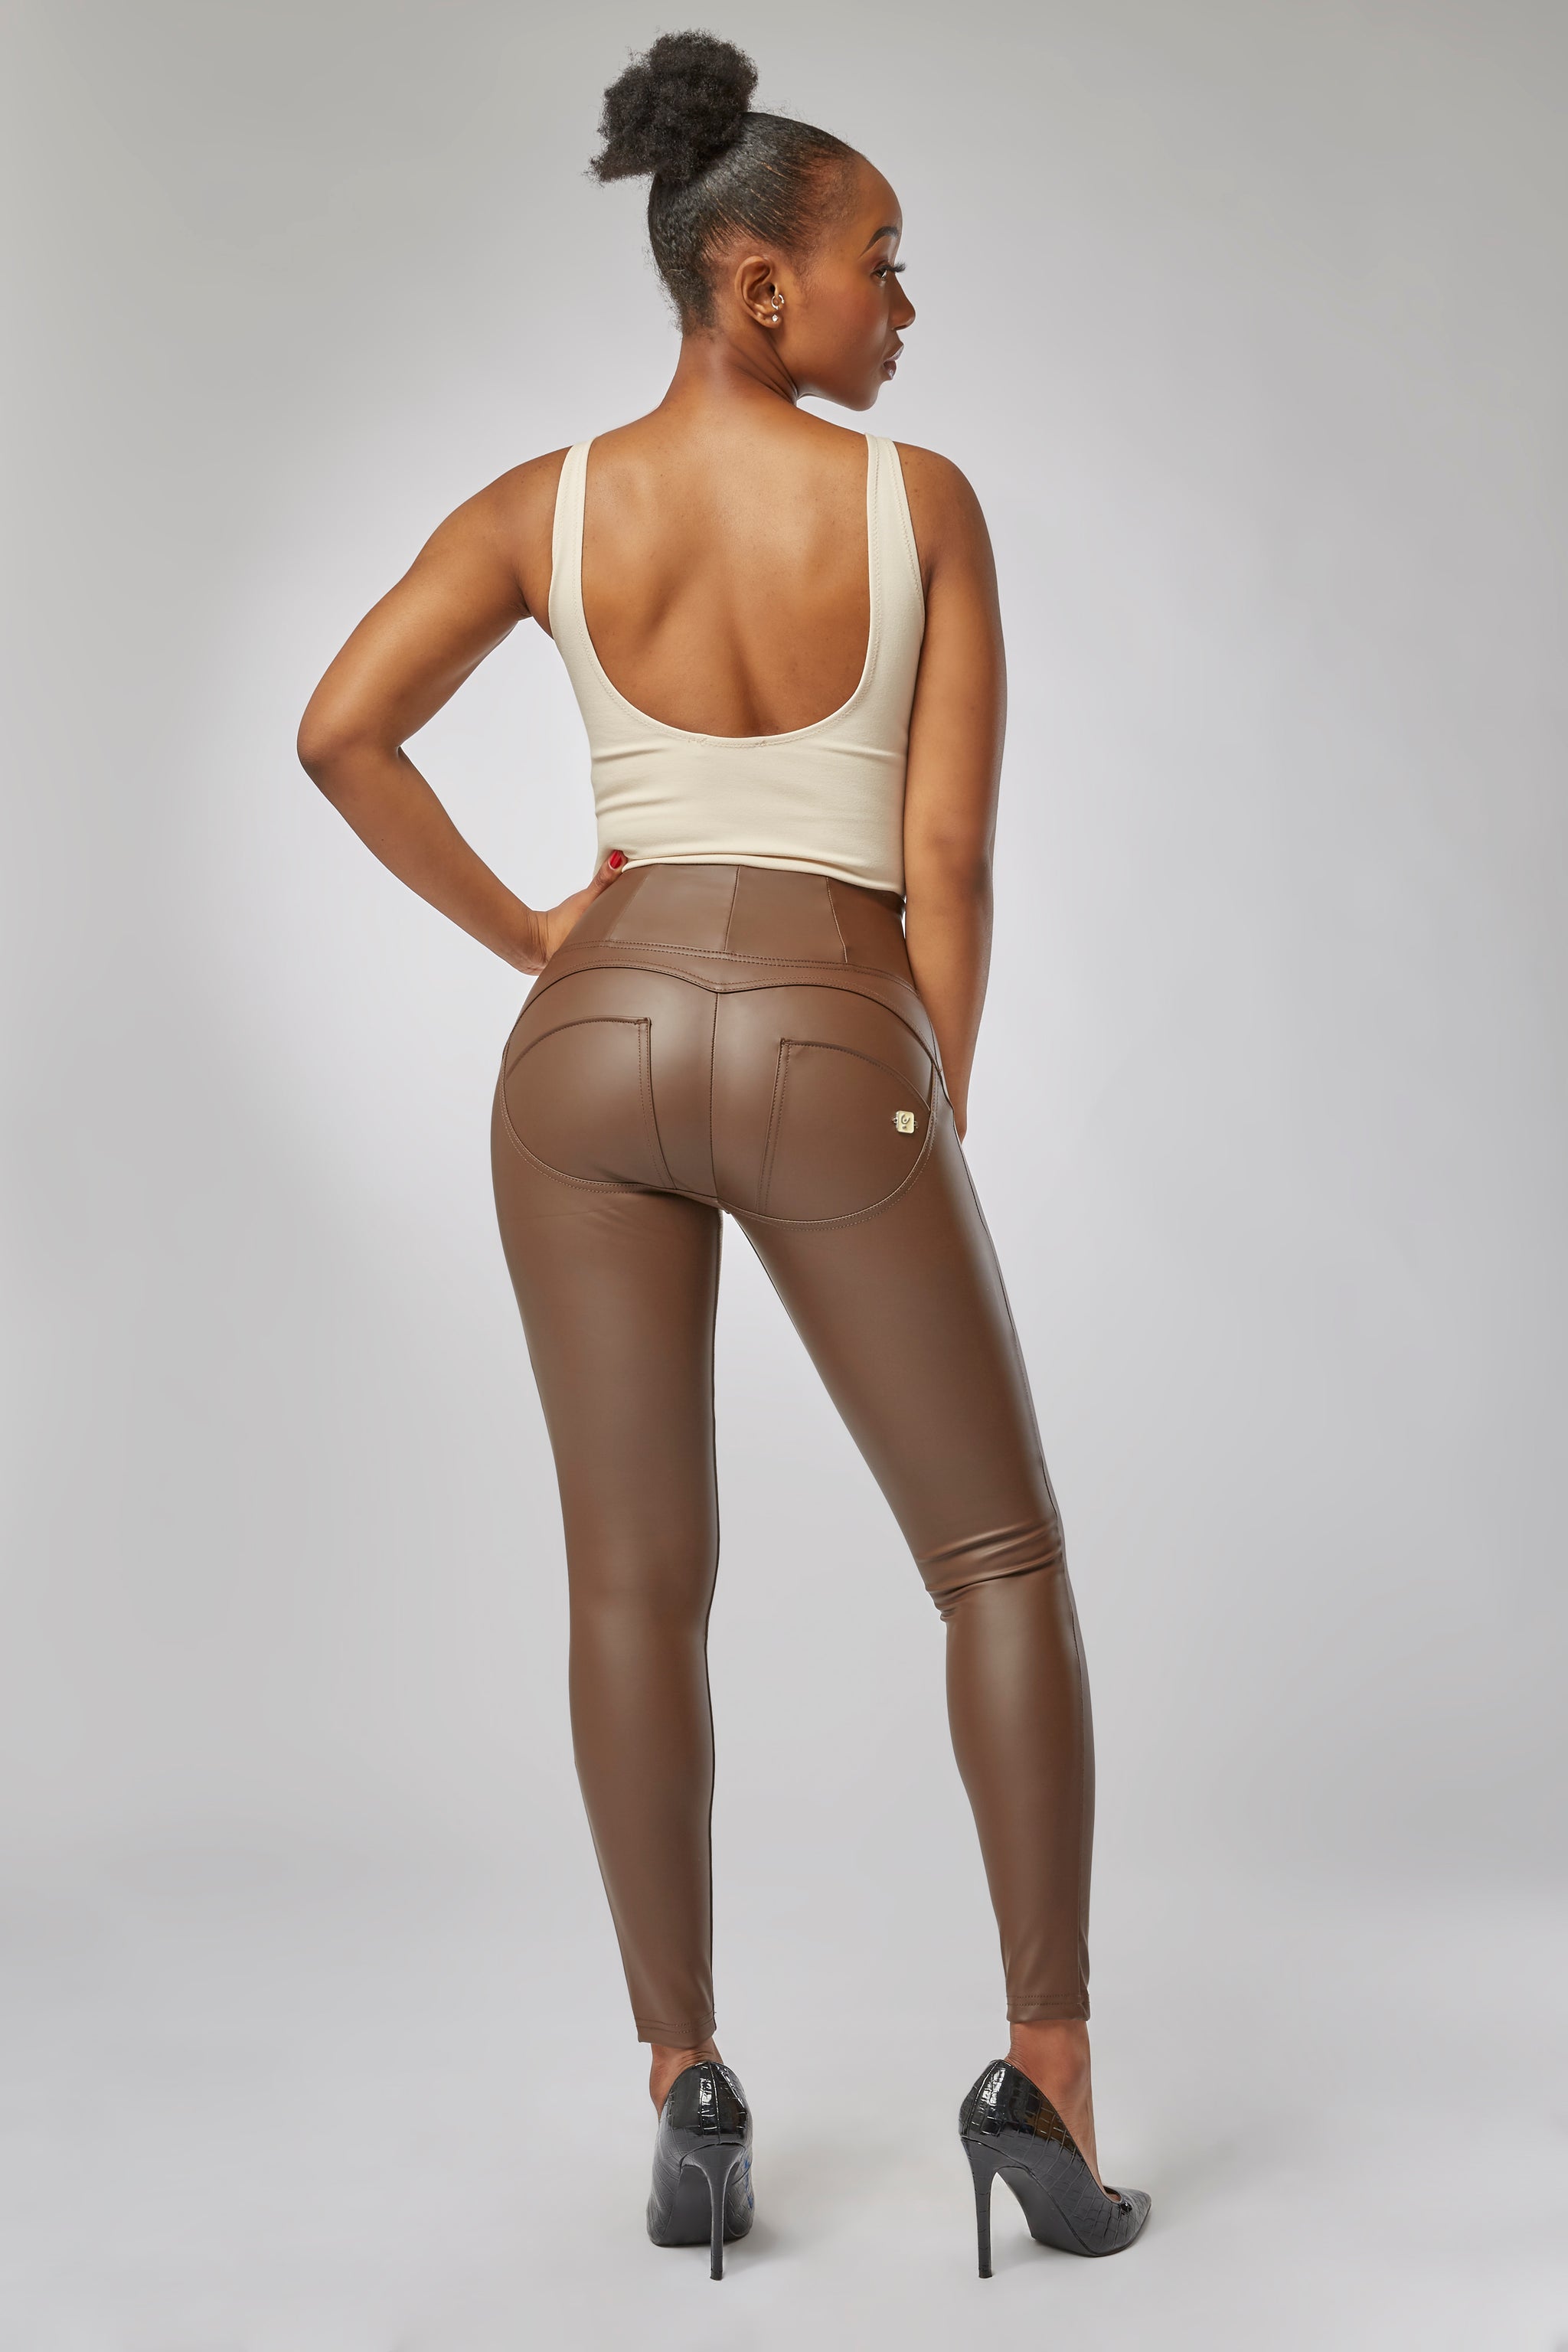 WR.UP® Faux Leather - High Rise Full Length - Brown - LIVIFY